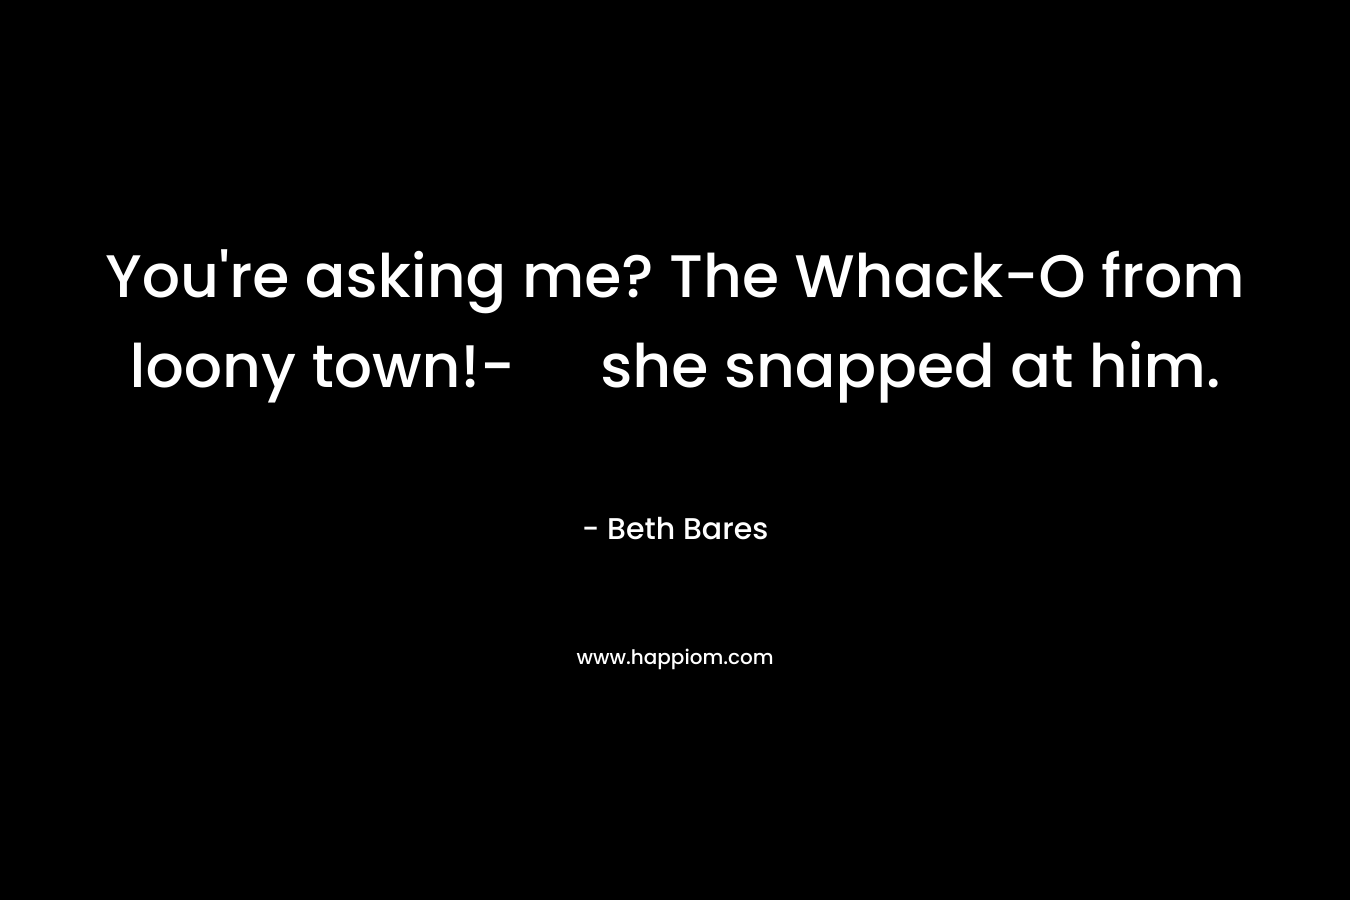 You're asking me? The Whack-O from loony town!- she snapped at him.